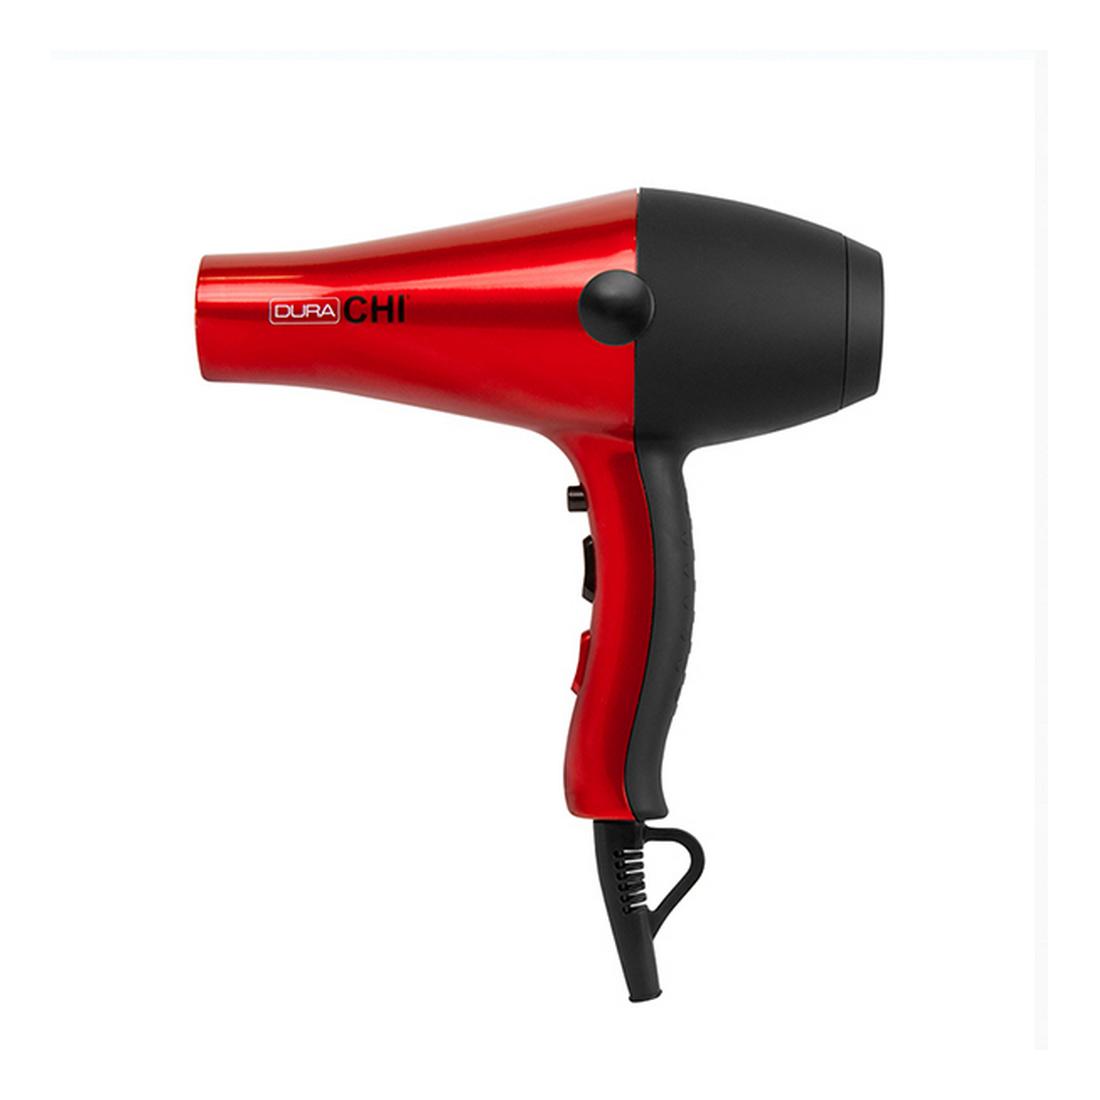 Hairdryer Chi Farouk Profesional Rapid Clean Led fast Professional